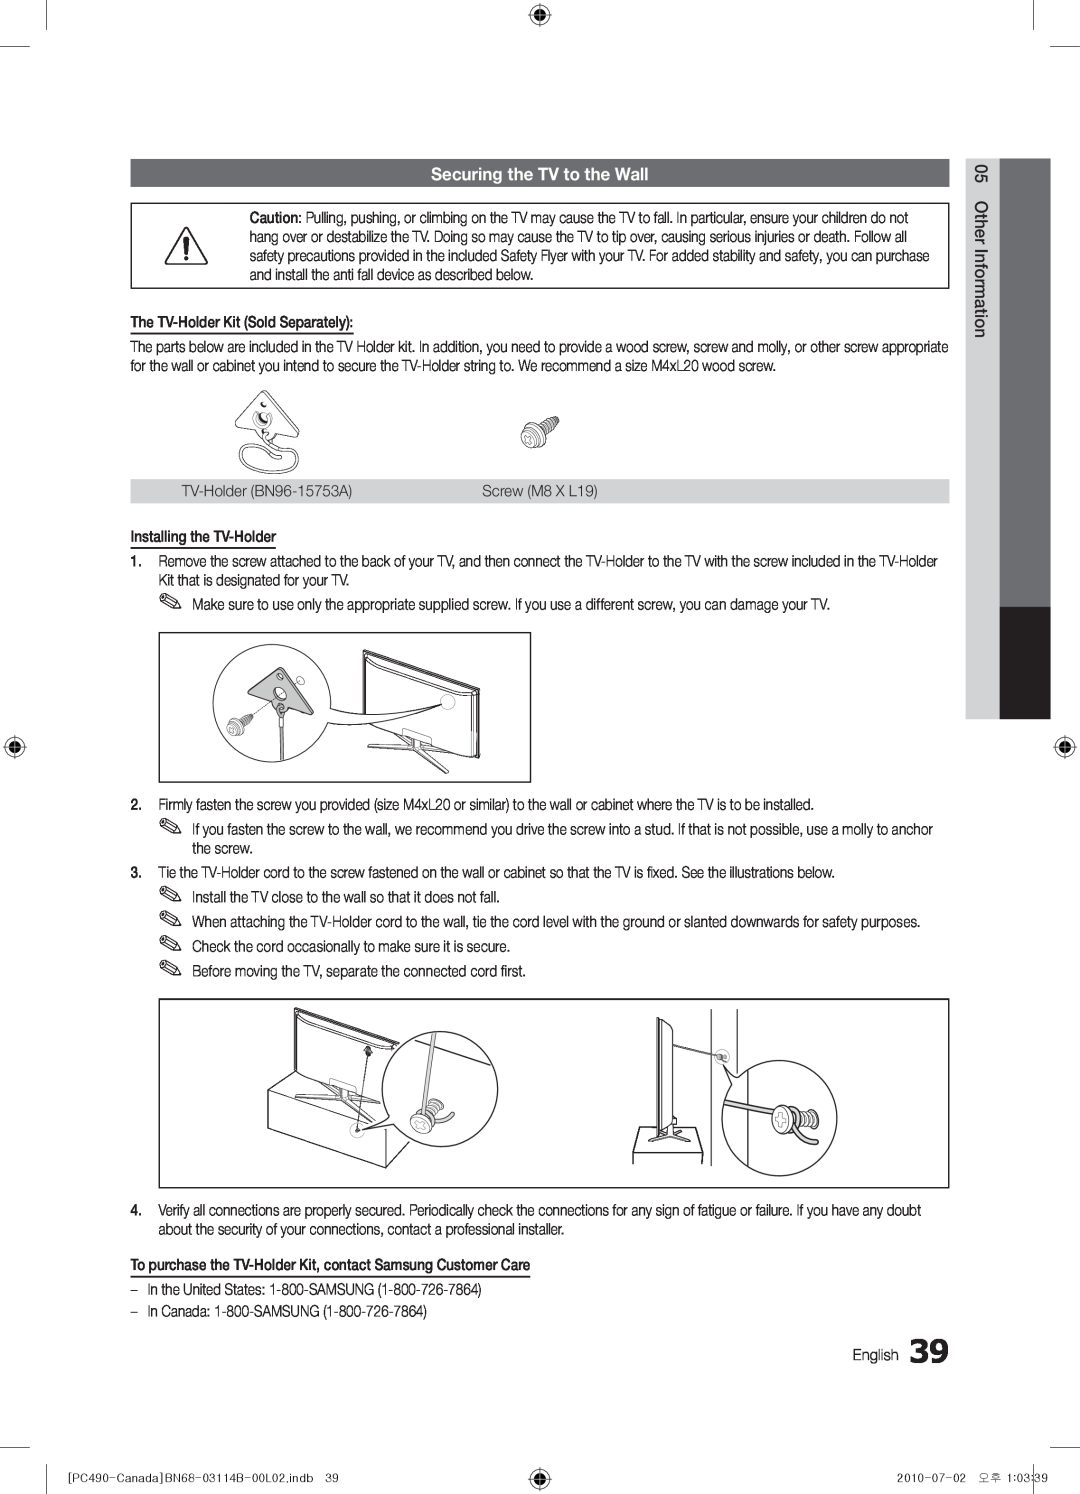 Samsung BN68-03114B-01, PN50C490, Series P4+ 490 user manual Securing the TV to the Wall 